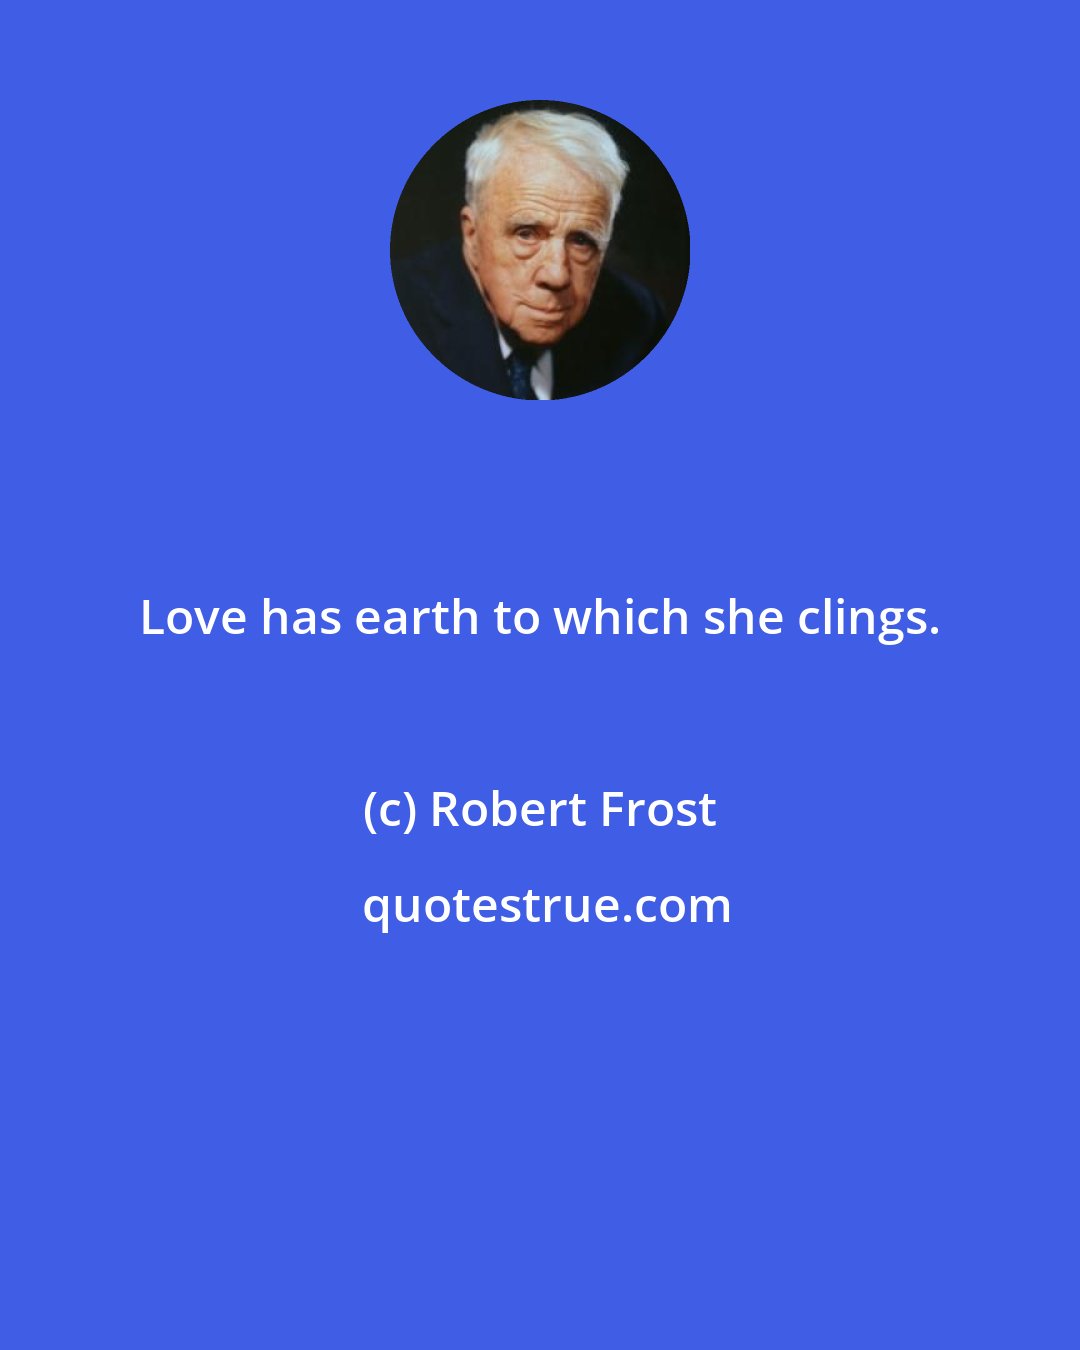 Robert Frost: Love has earth to which she clings.